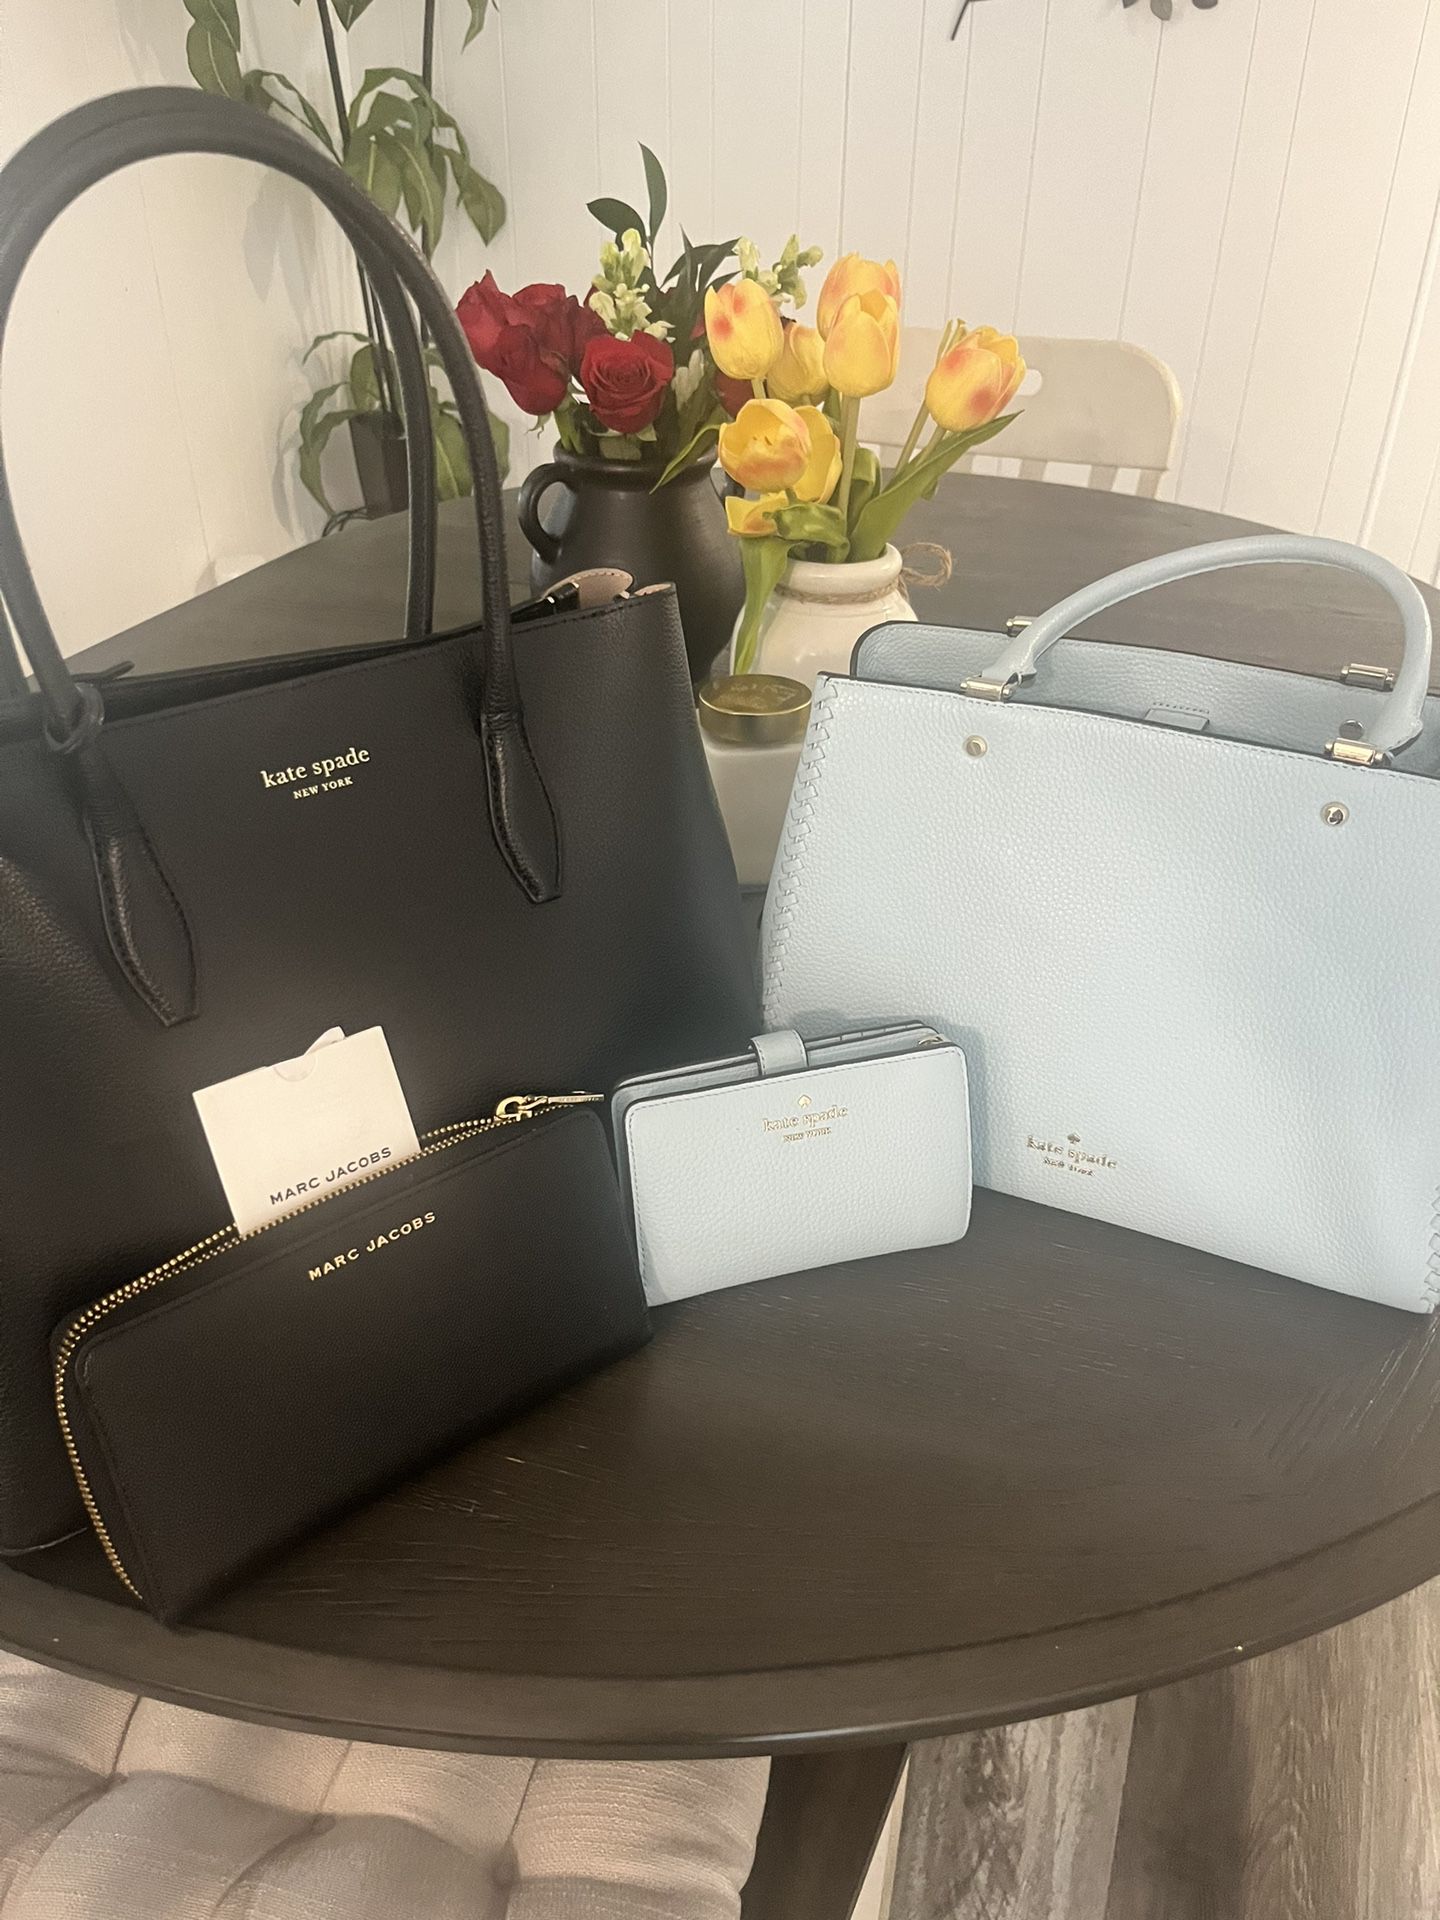 Kate Spade Bags And Marc Jacob’s Wallet